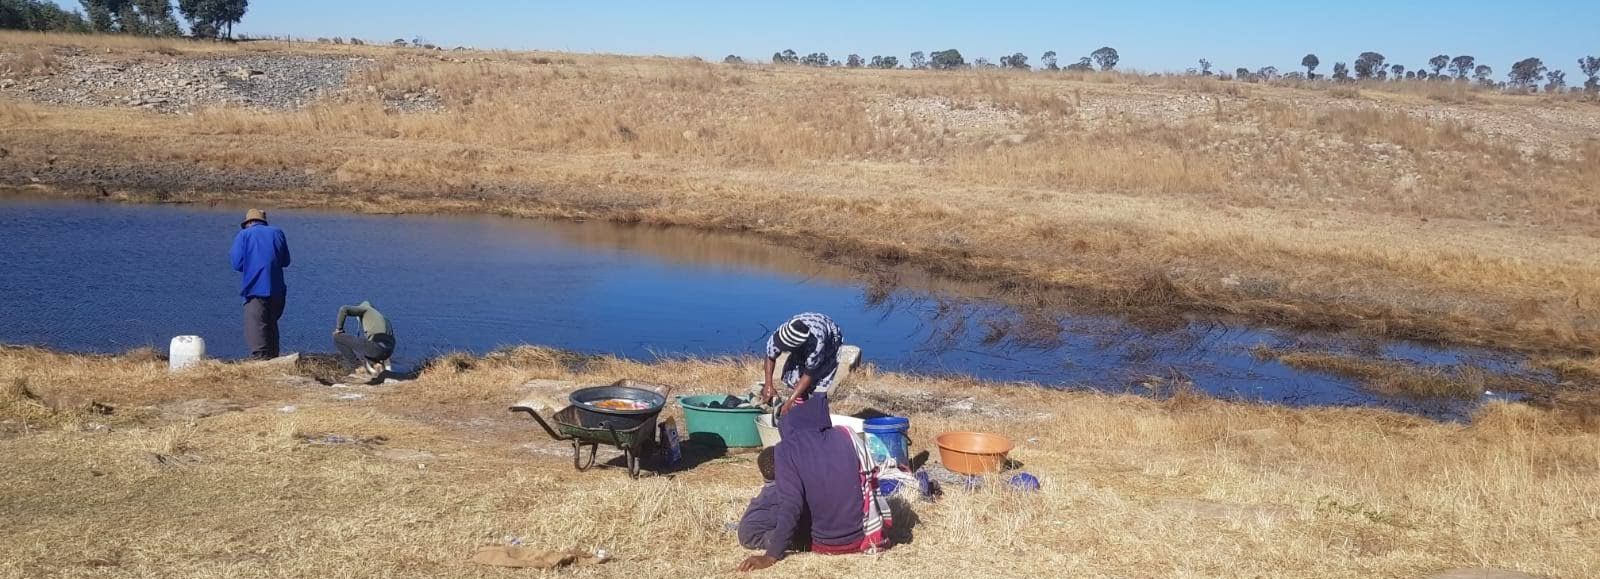 Men collect water at a pond while a lady washes her clothes